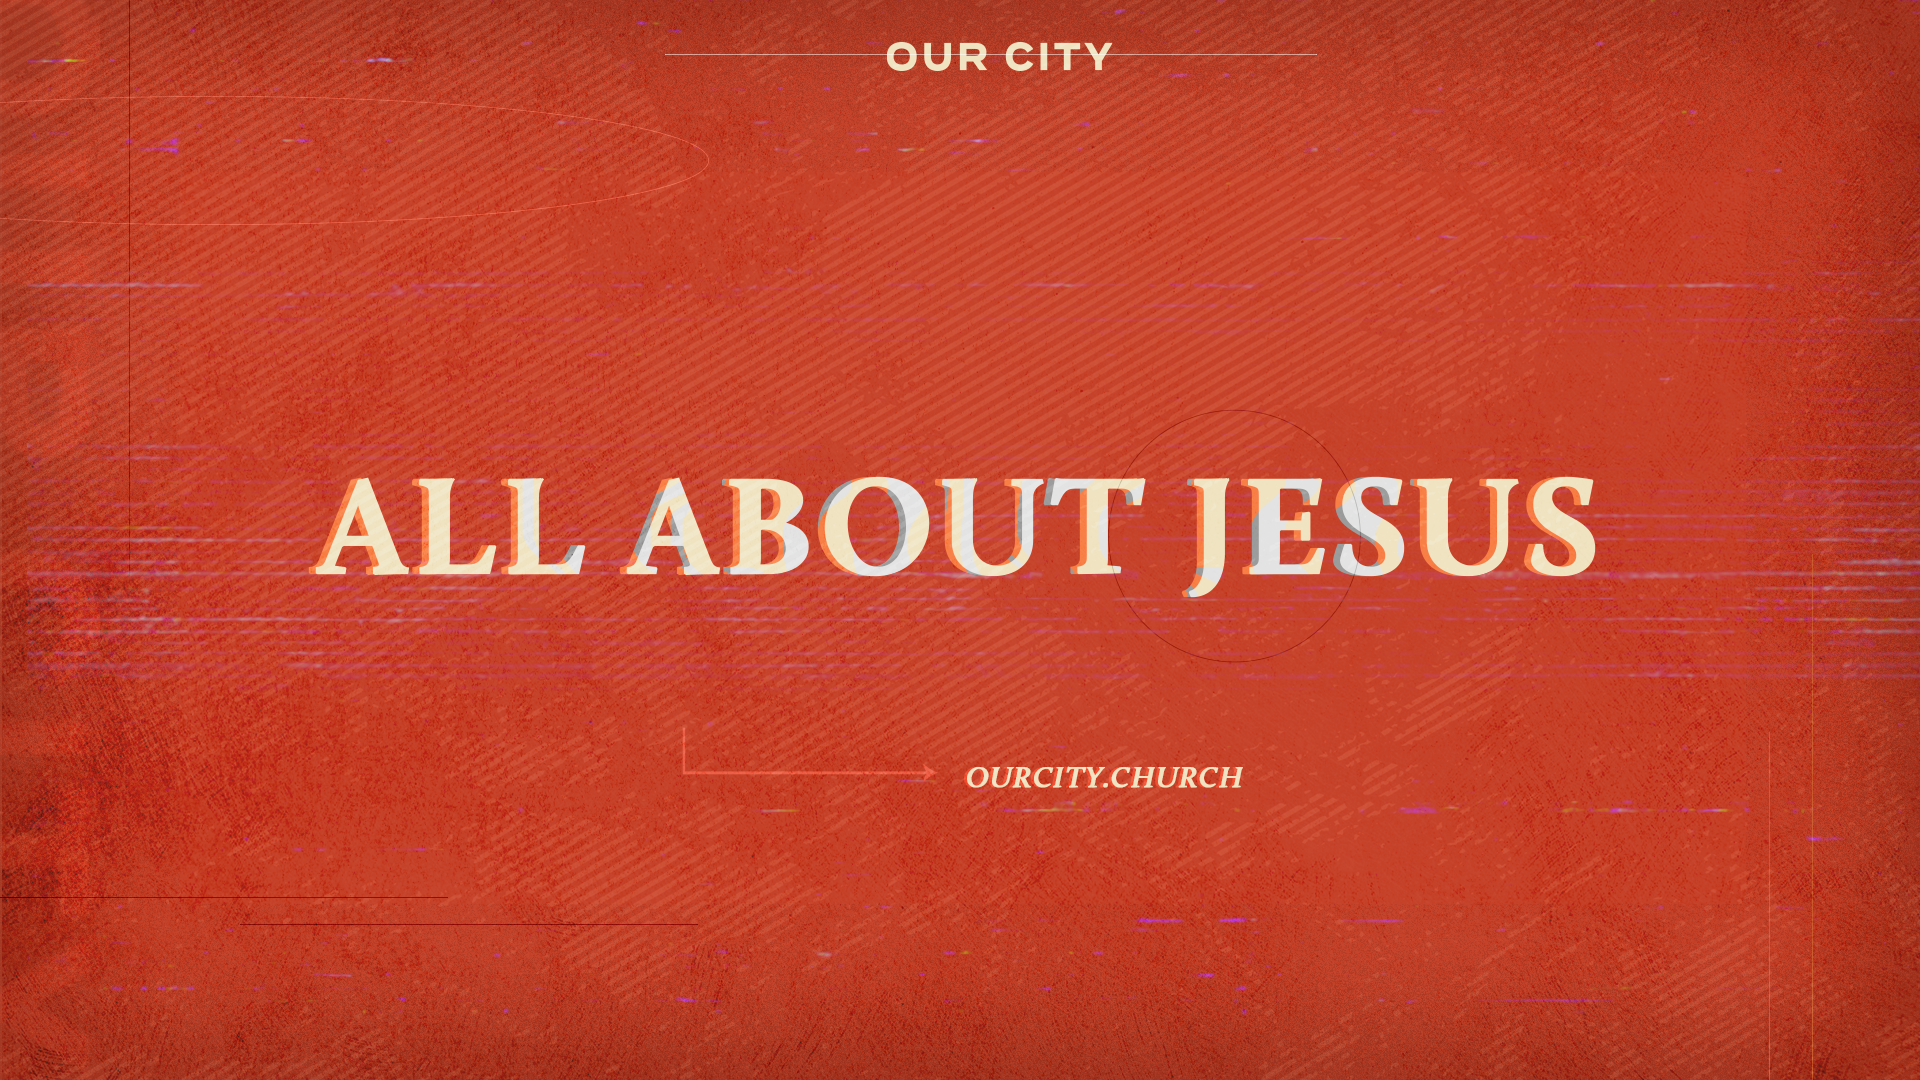 All About Jesus Image